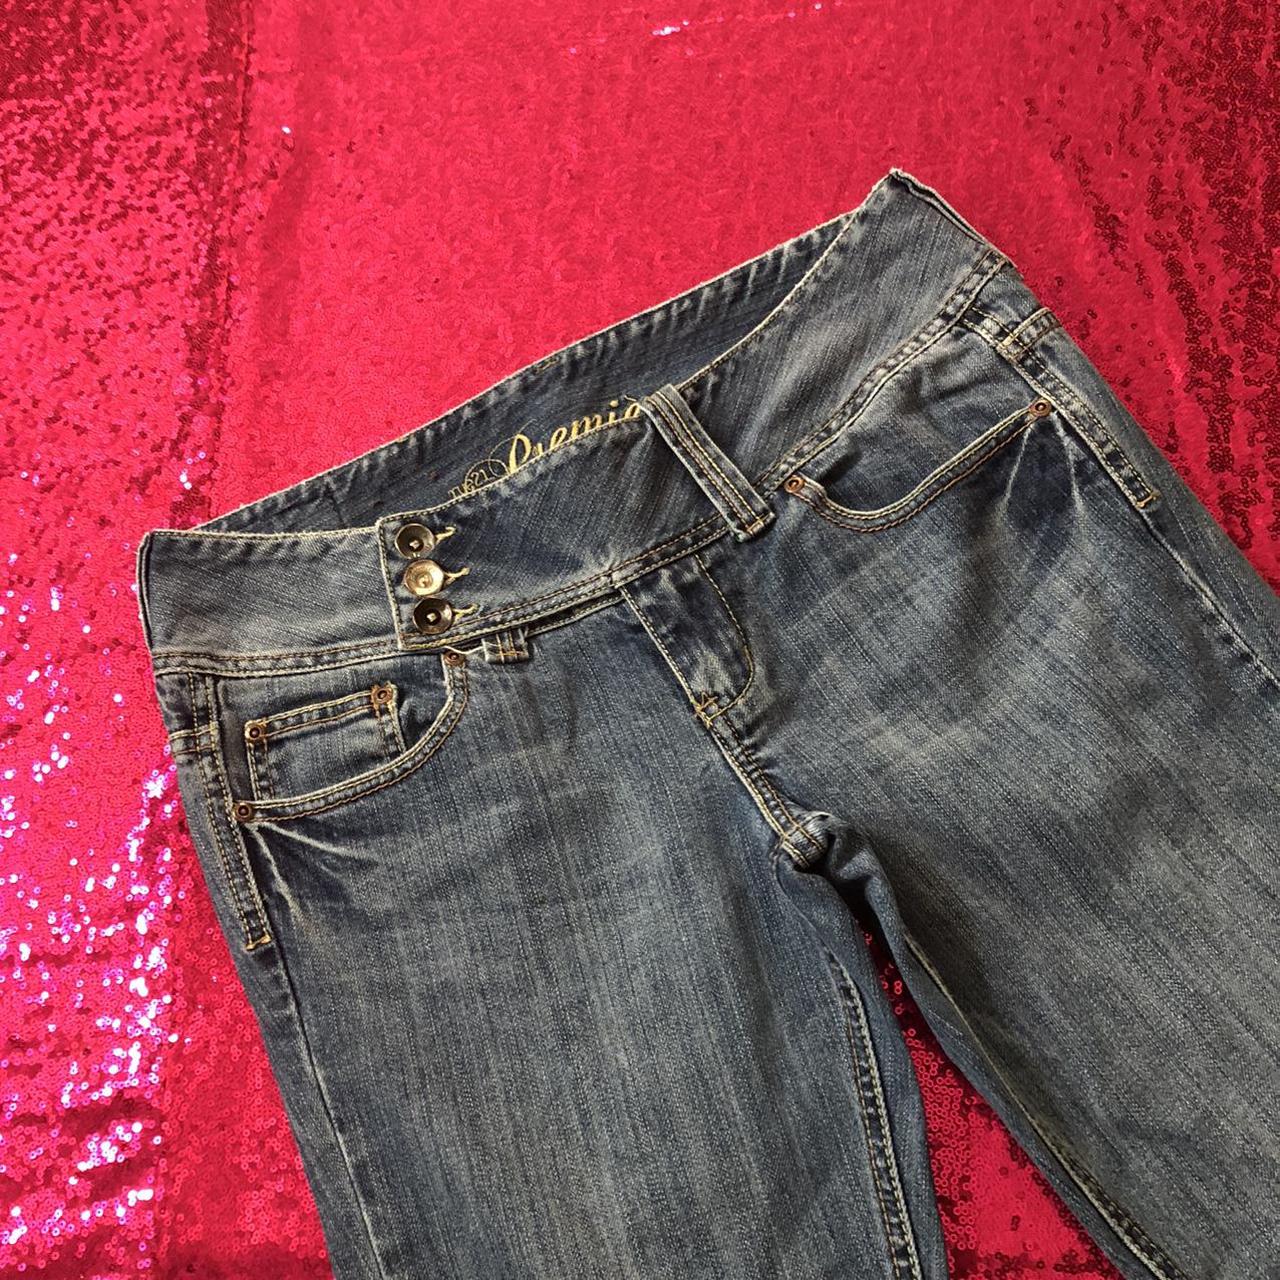 Product Image 1 - ⚡️ the y2k bratz jeans!

❗️this